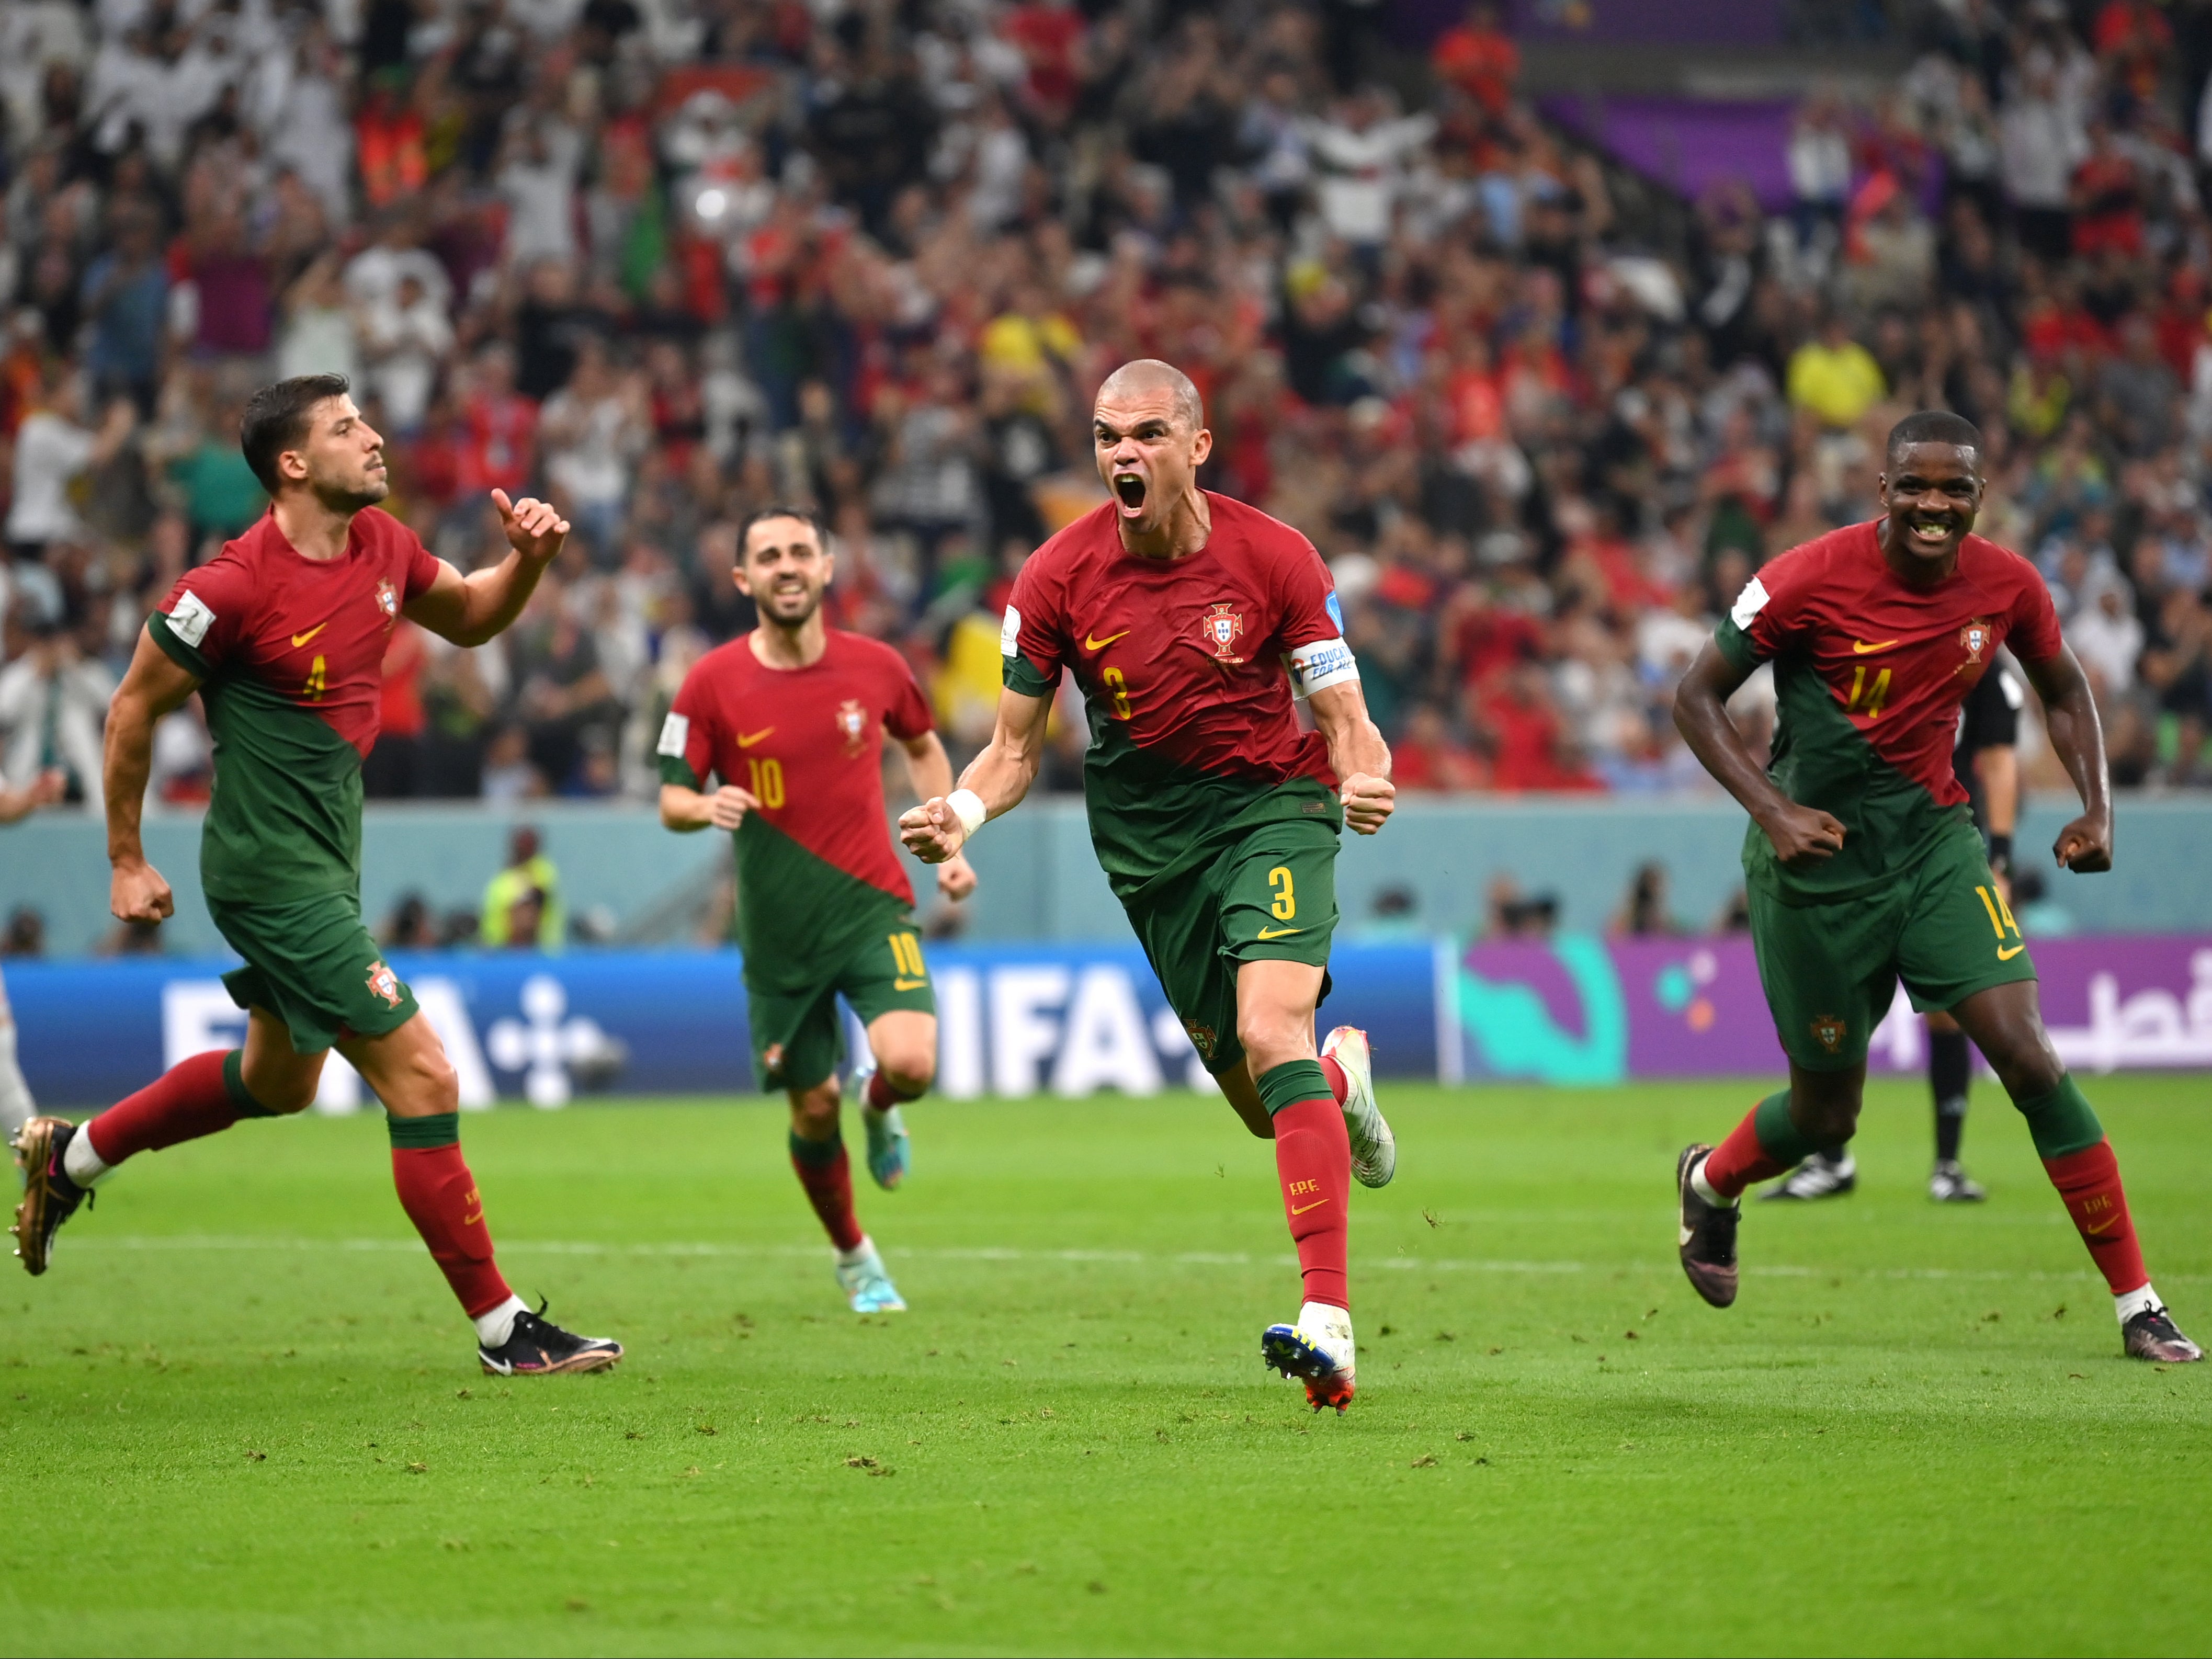 Pepe headed home Portugal’s second goal against Switzerland